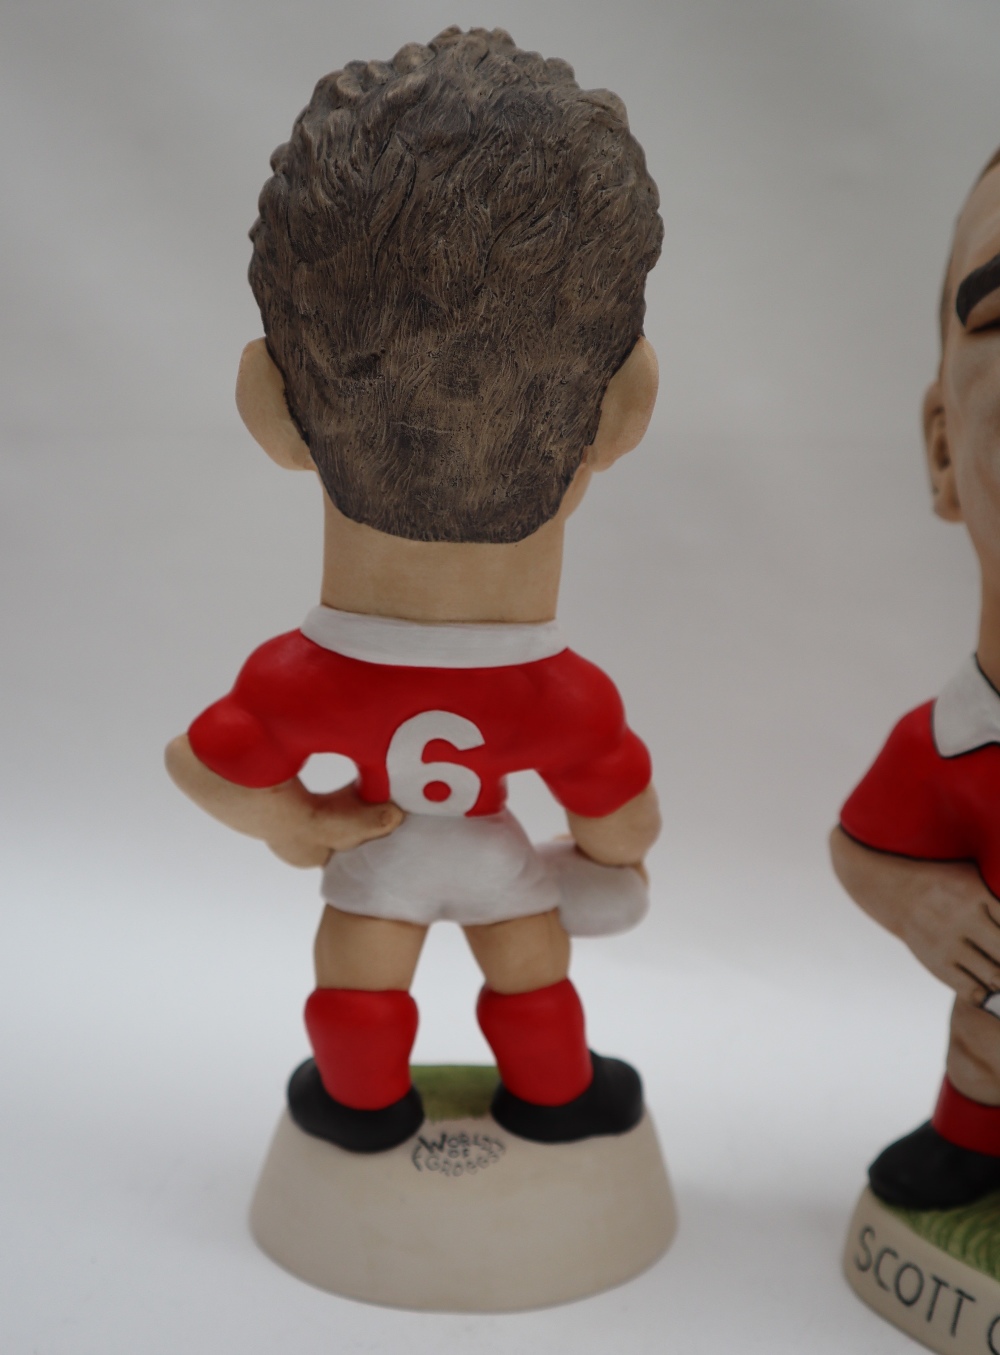 A World of Groggs Limited edition resin figure of Dafydd Jones No. - Image 3 of 6